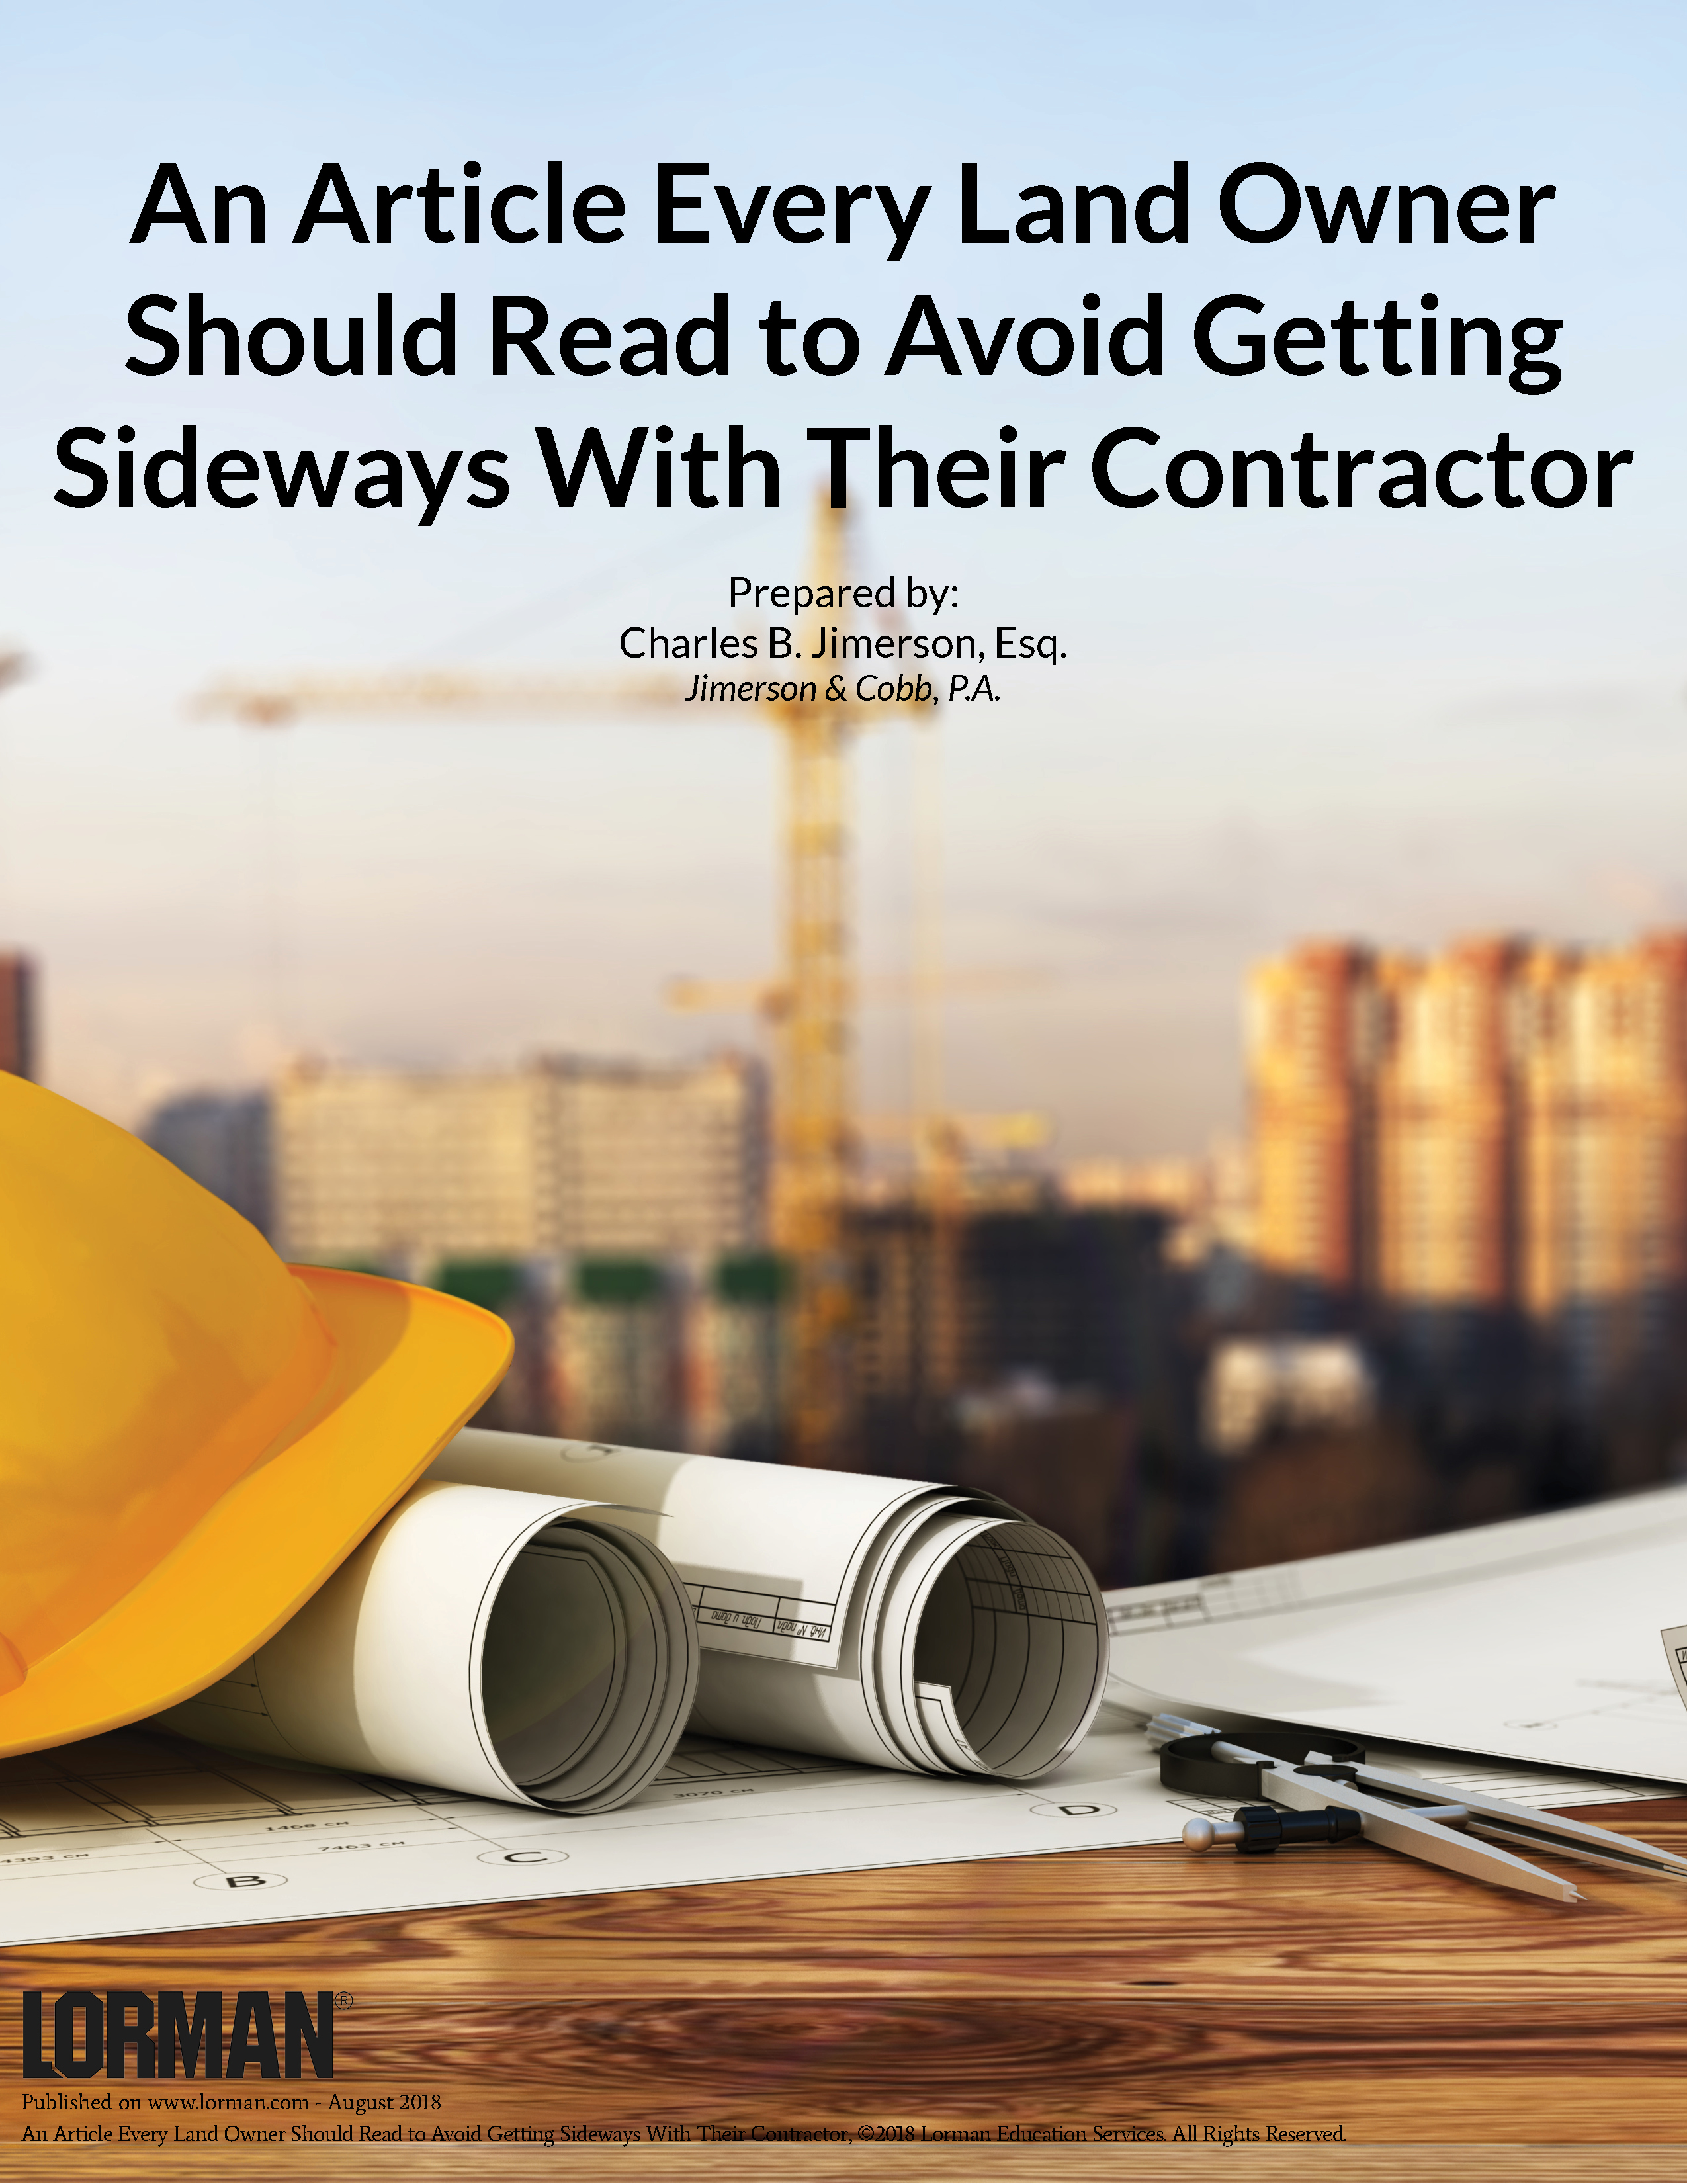 An Article Every Land Owner Should Read to Avoid Getting Sideways With Their Contractor